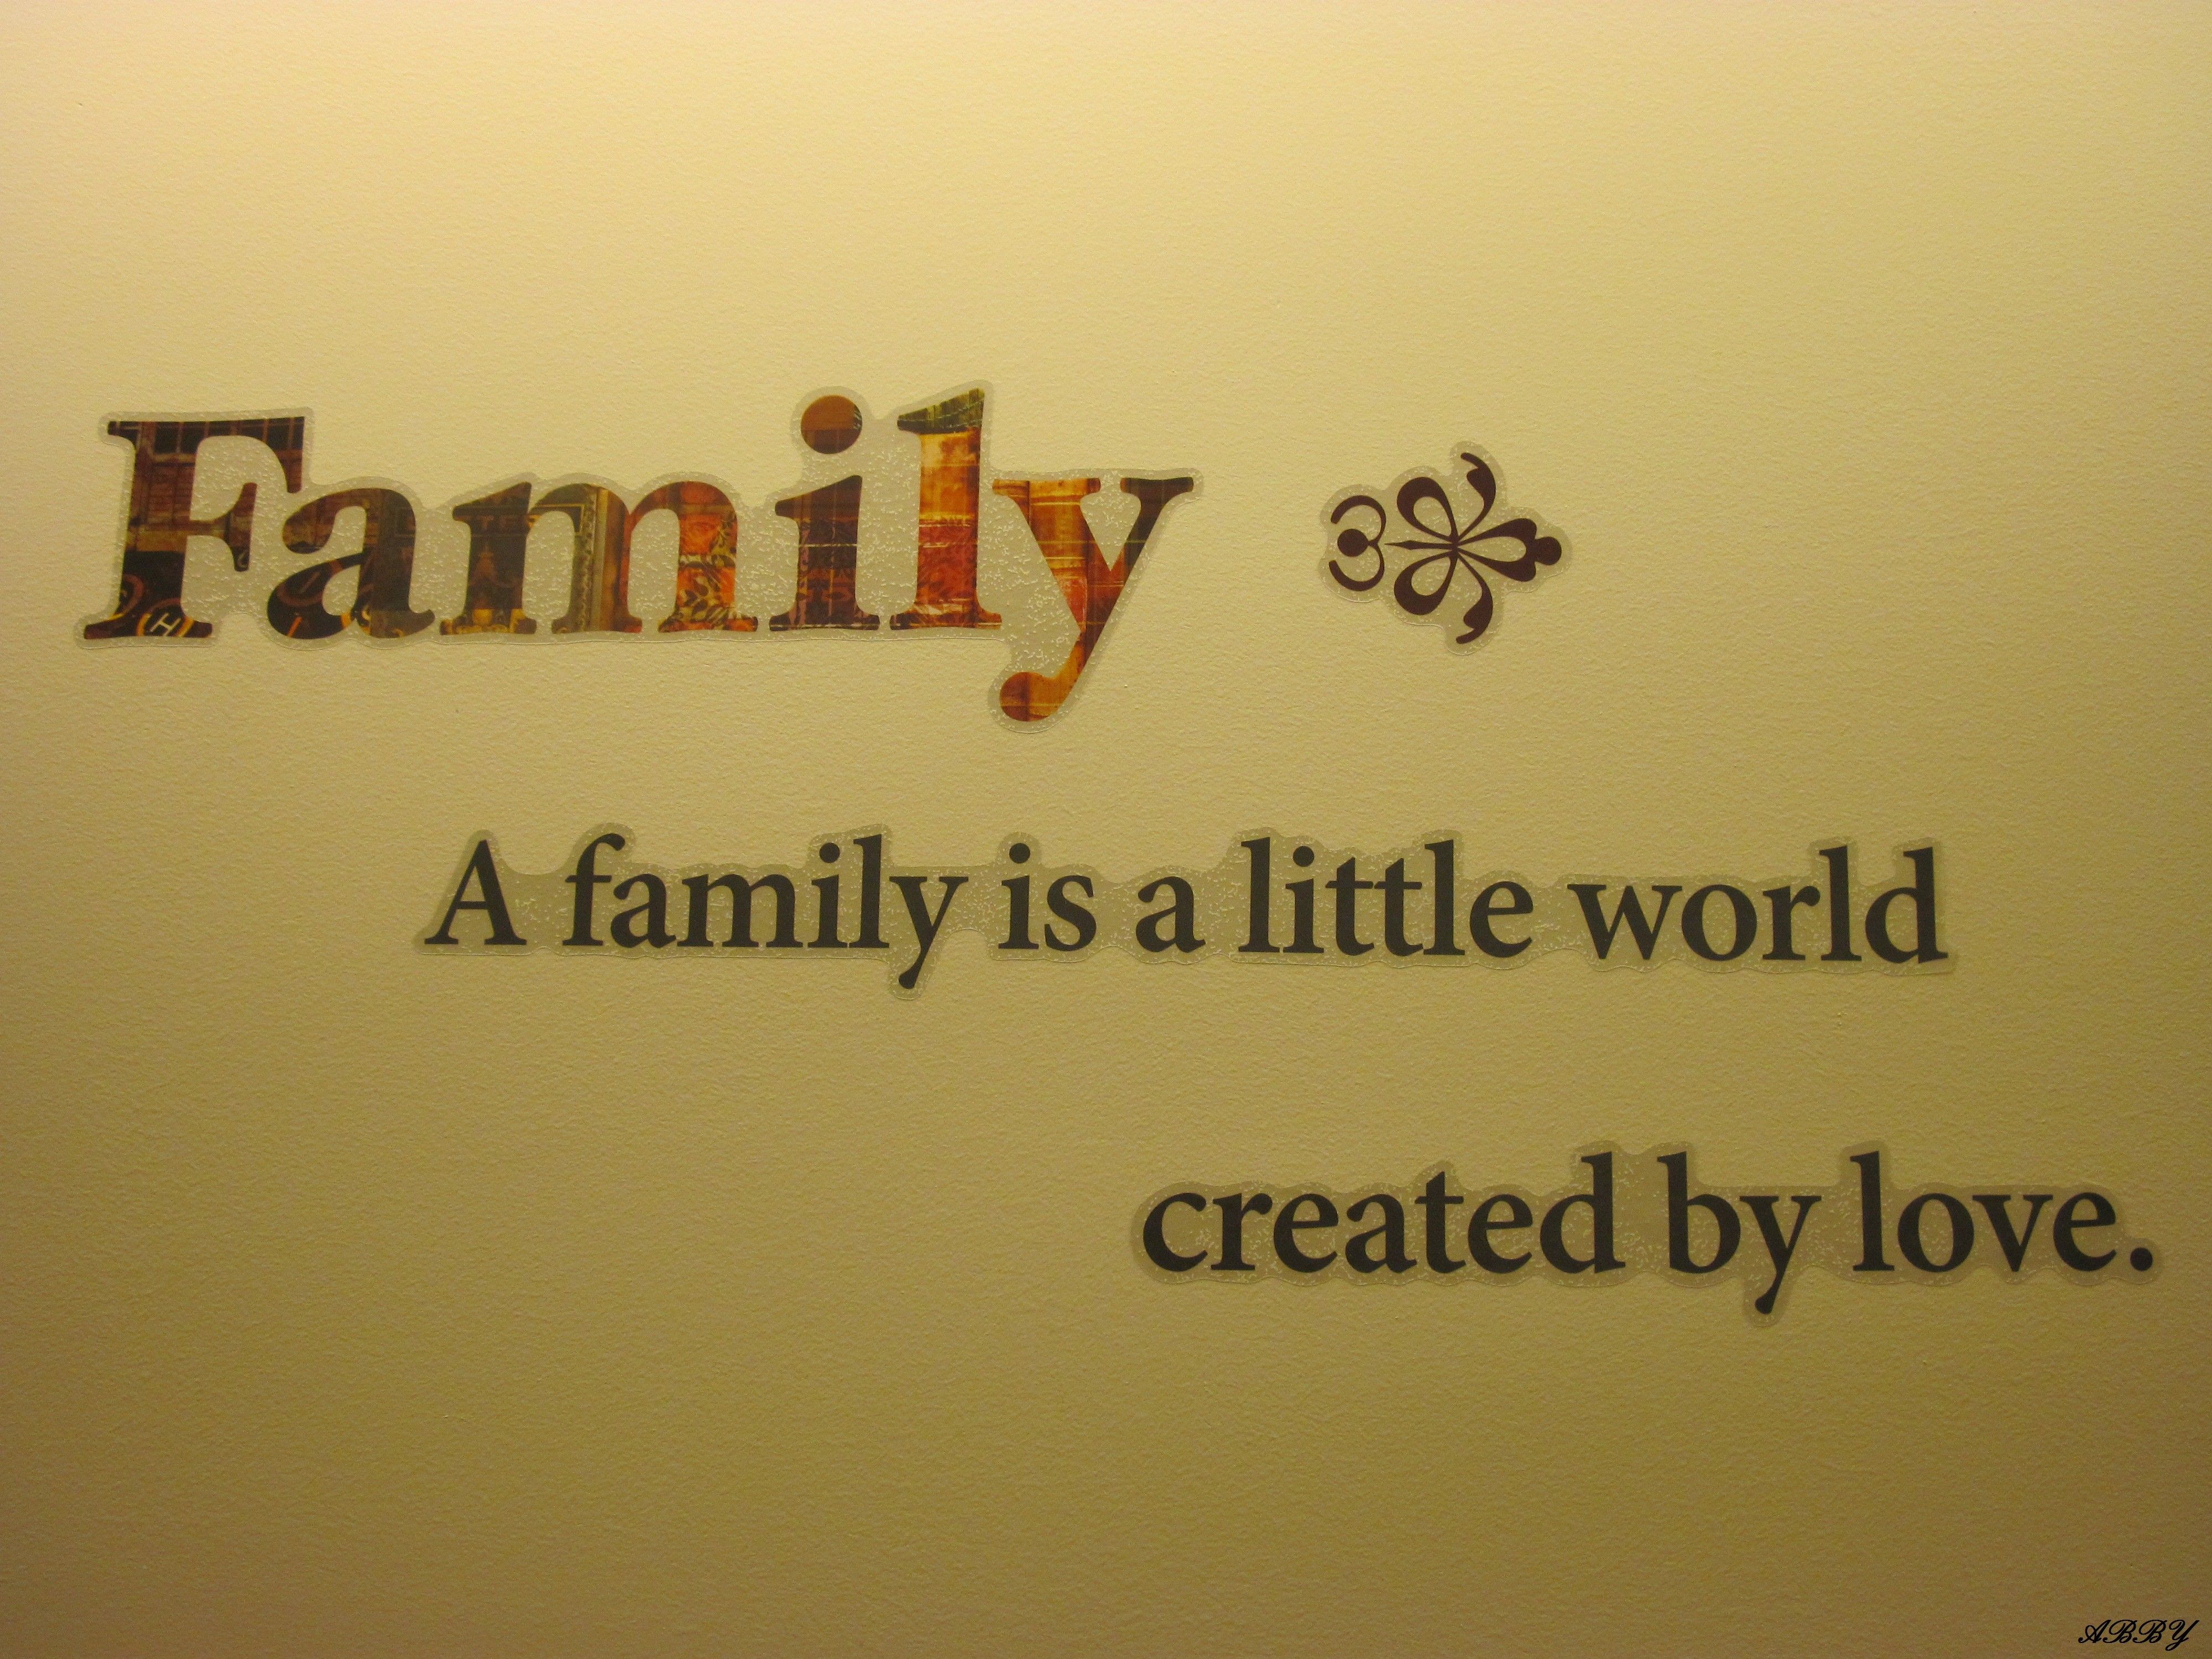 Family with love wallpaper. PC